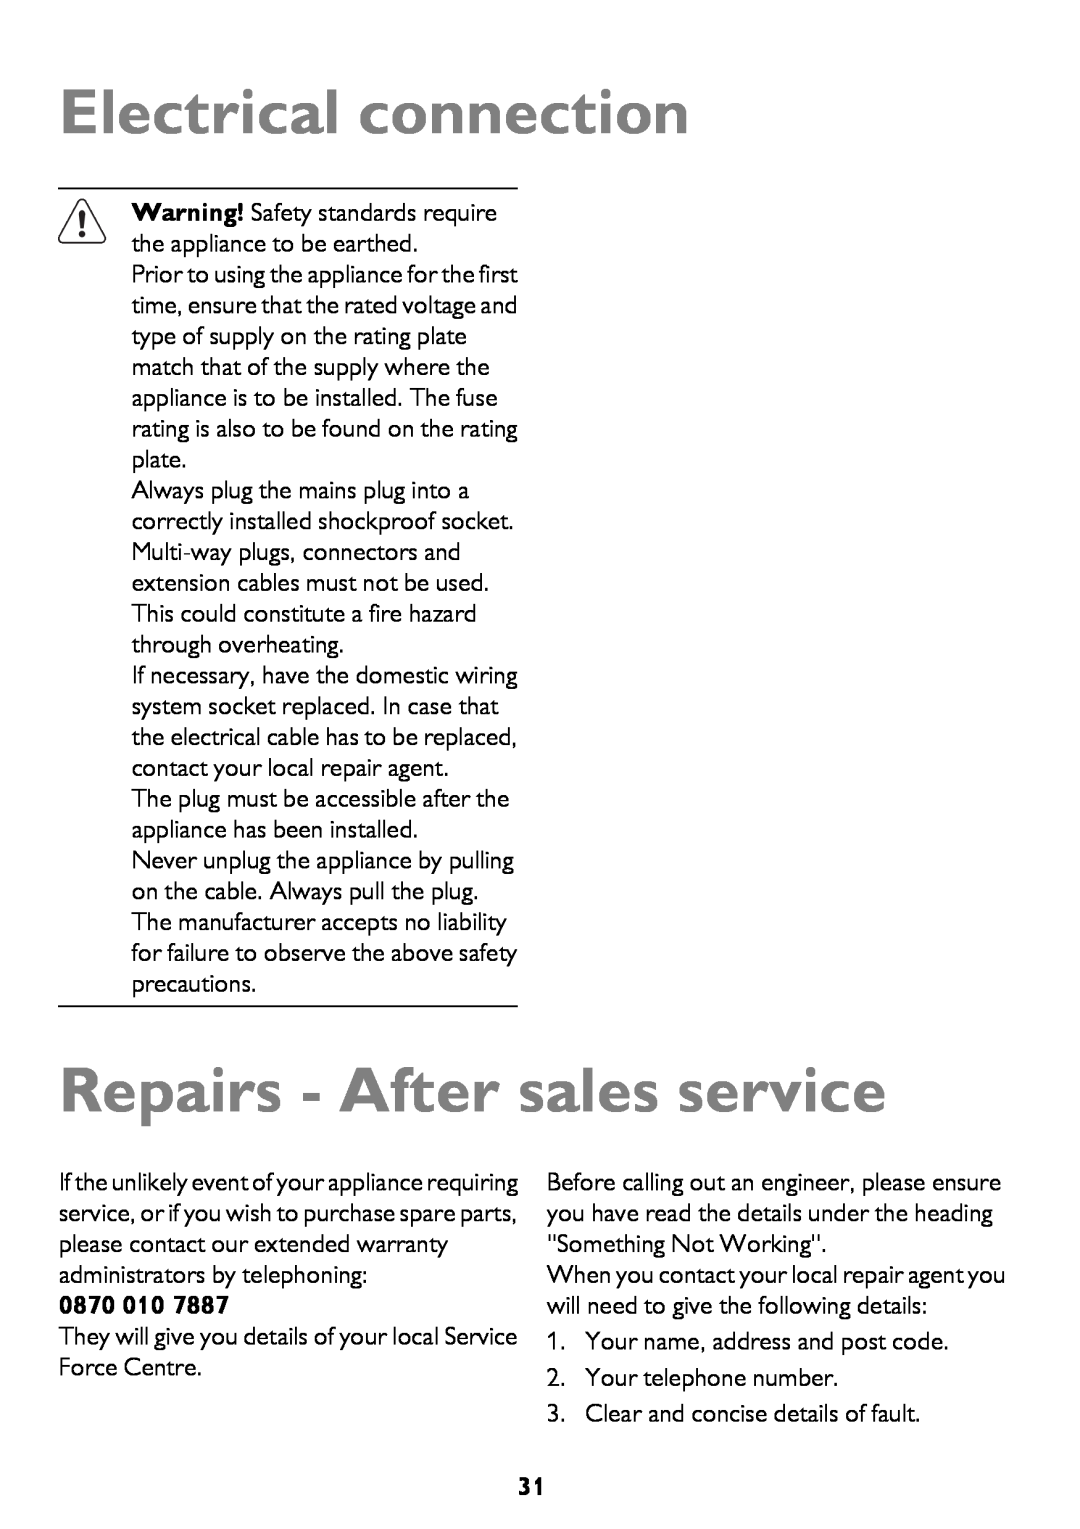 John Lewis JLDWW 1206 instruction manual Electrical connection, Repairs - After sales service, 0870 010 